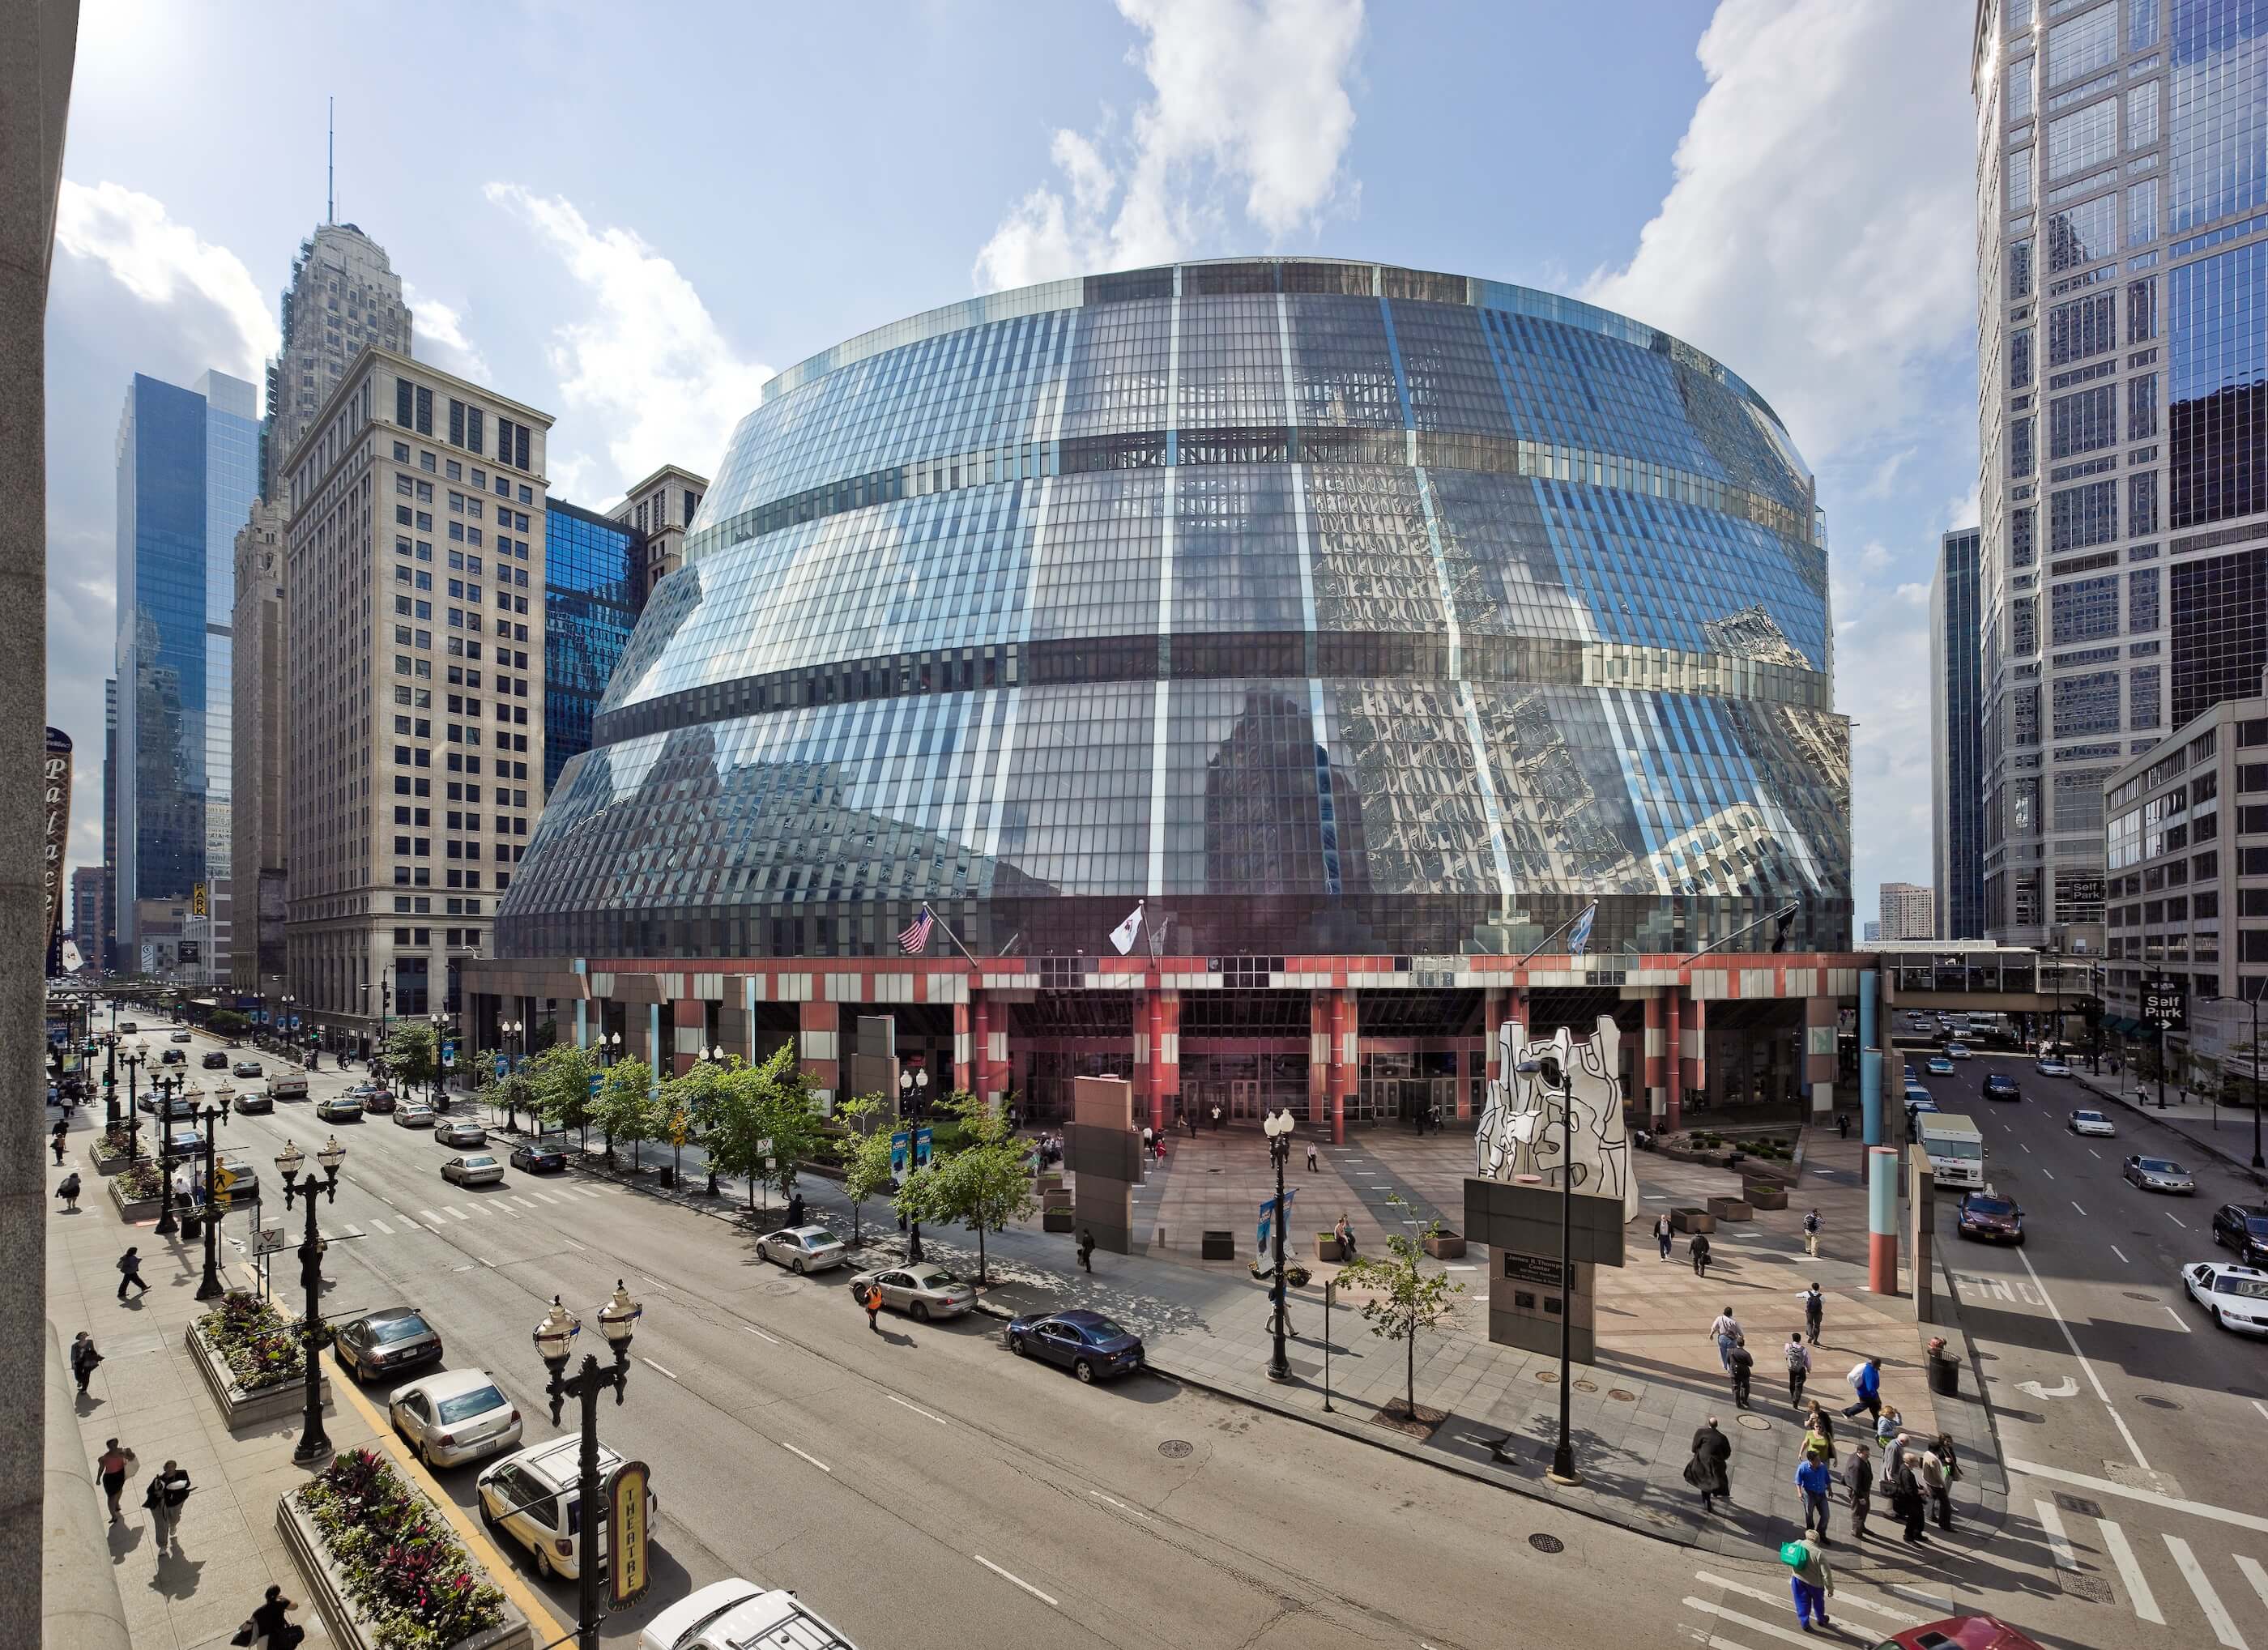 exterior view of a futuristic glass building in a city